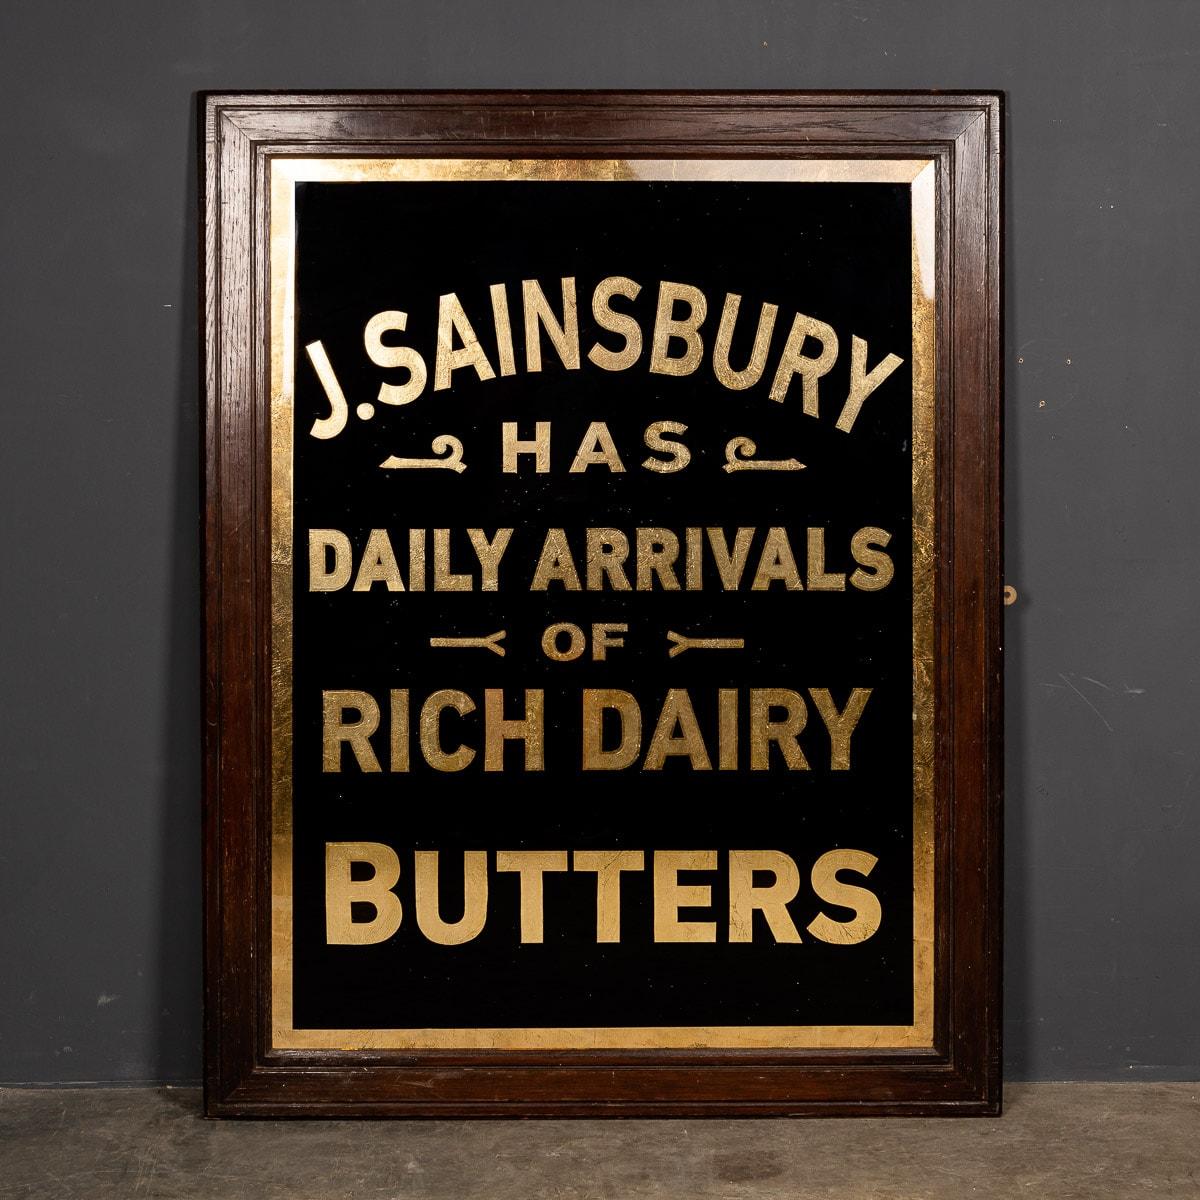 A mid 20th Century J. Sainsbury's Dairy advertising mirror in an original mahogany frame. Advertising dairy products including butter for J Sainsbury, painted in black and gold lettering.

CONDITION
In Good Condition. Wear as expected with age.